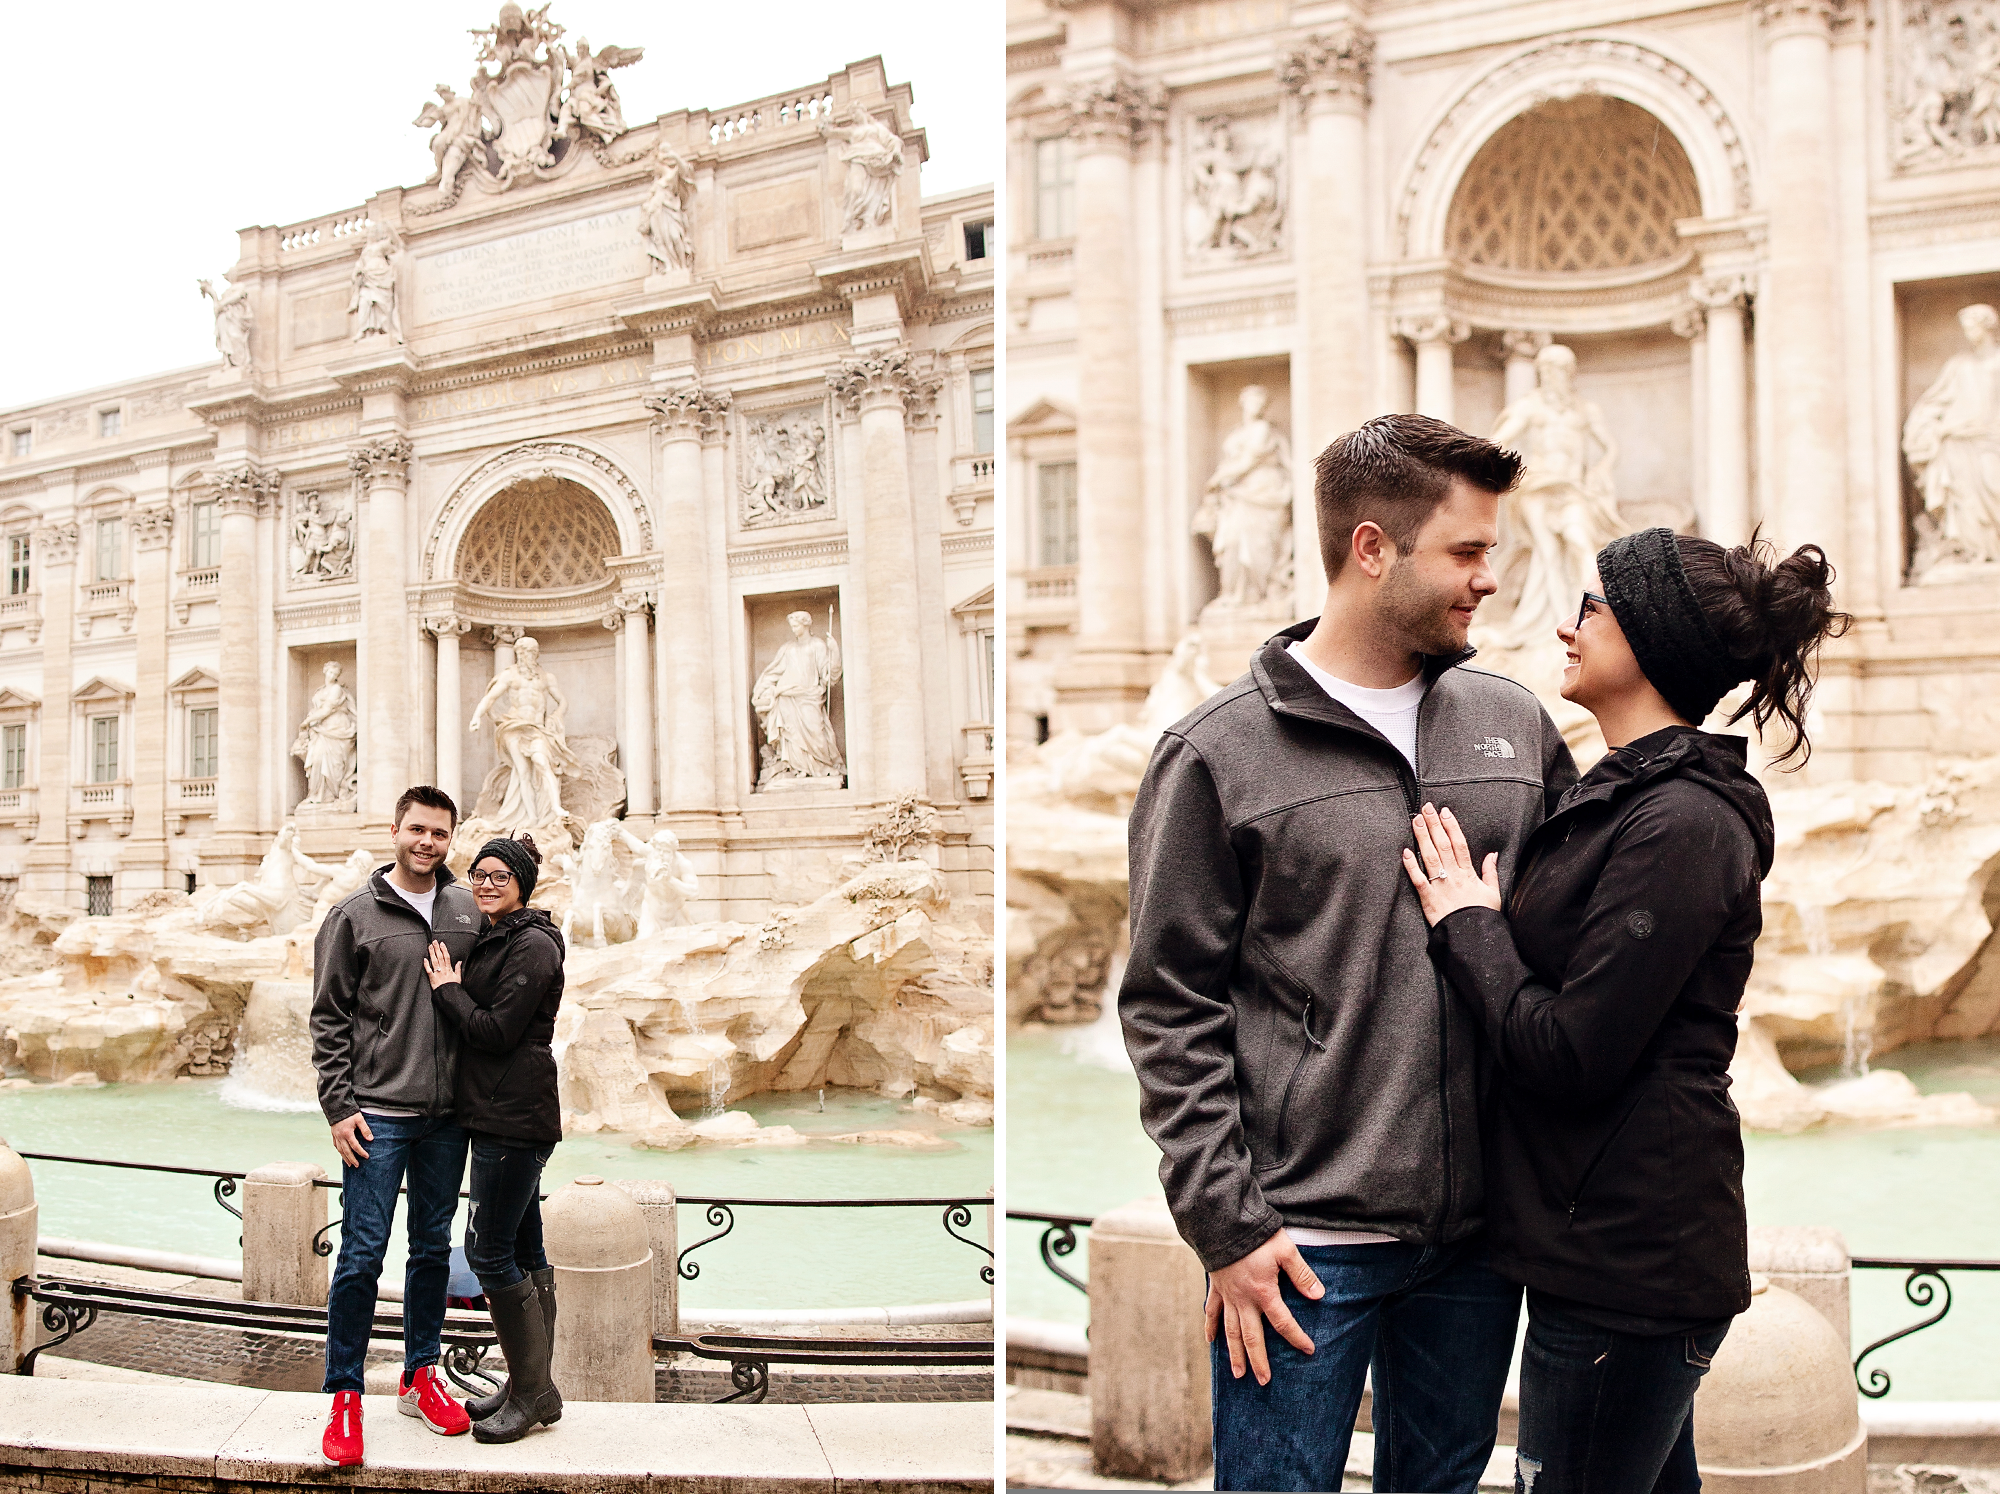 Honeymoon, vacation, family, engagement, maternity, wedding, love story individual and solo photoshoots in Rome, Italy by photographer Tricia Anne Photography | Rome Photographer, vacation, tripadvisor, instagram, fun, married, bride, groom, love, story, photography, session, photoshoot, wedding photographer, mywed, vacation photographer, engagement photo, honeymoon photoshoot, rome honeymoon, rome wedding, elopement in Rome, honeymoon photographer rome, Family Photo shoot Rome, Rome Engagement Photography, Rome Engagement Photographer, family Photo shoot, Rome Photography, surprise proposal rome, What to do in Rome, Trevi Fountain, Trevi Fountain Surprise Proposal